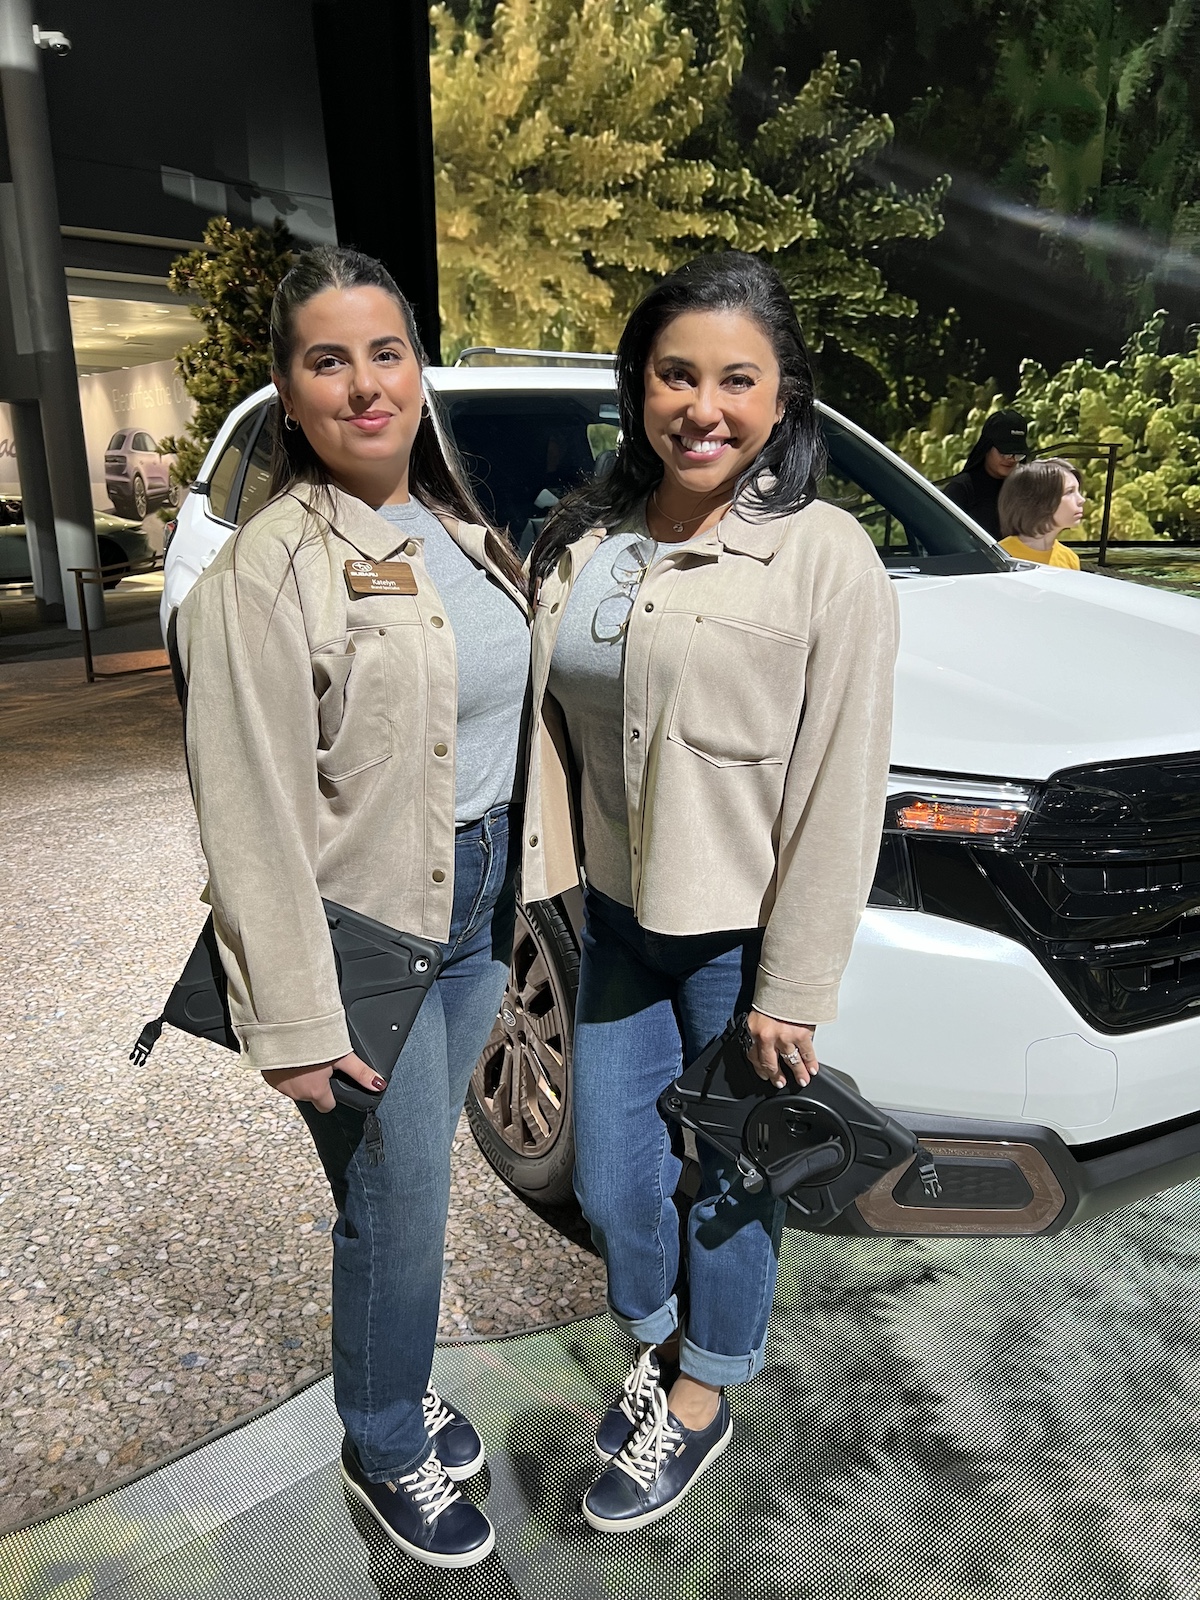 Vince Camuto Shirts, Liverpool Jeans And Ecco Shoes At Subaru Car Shows